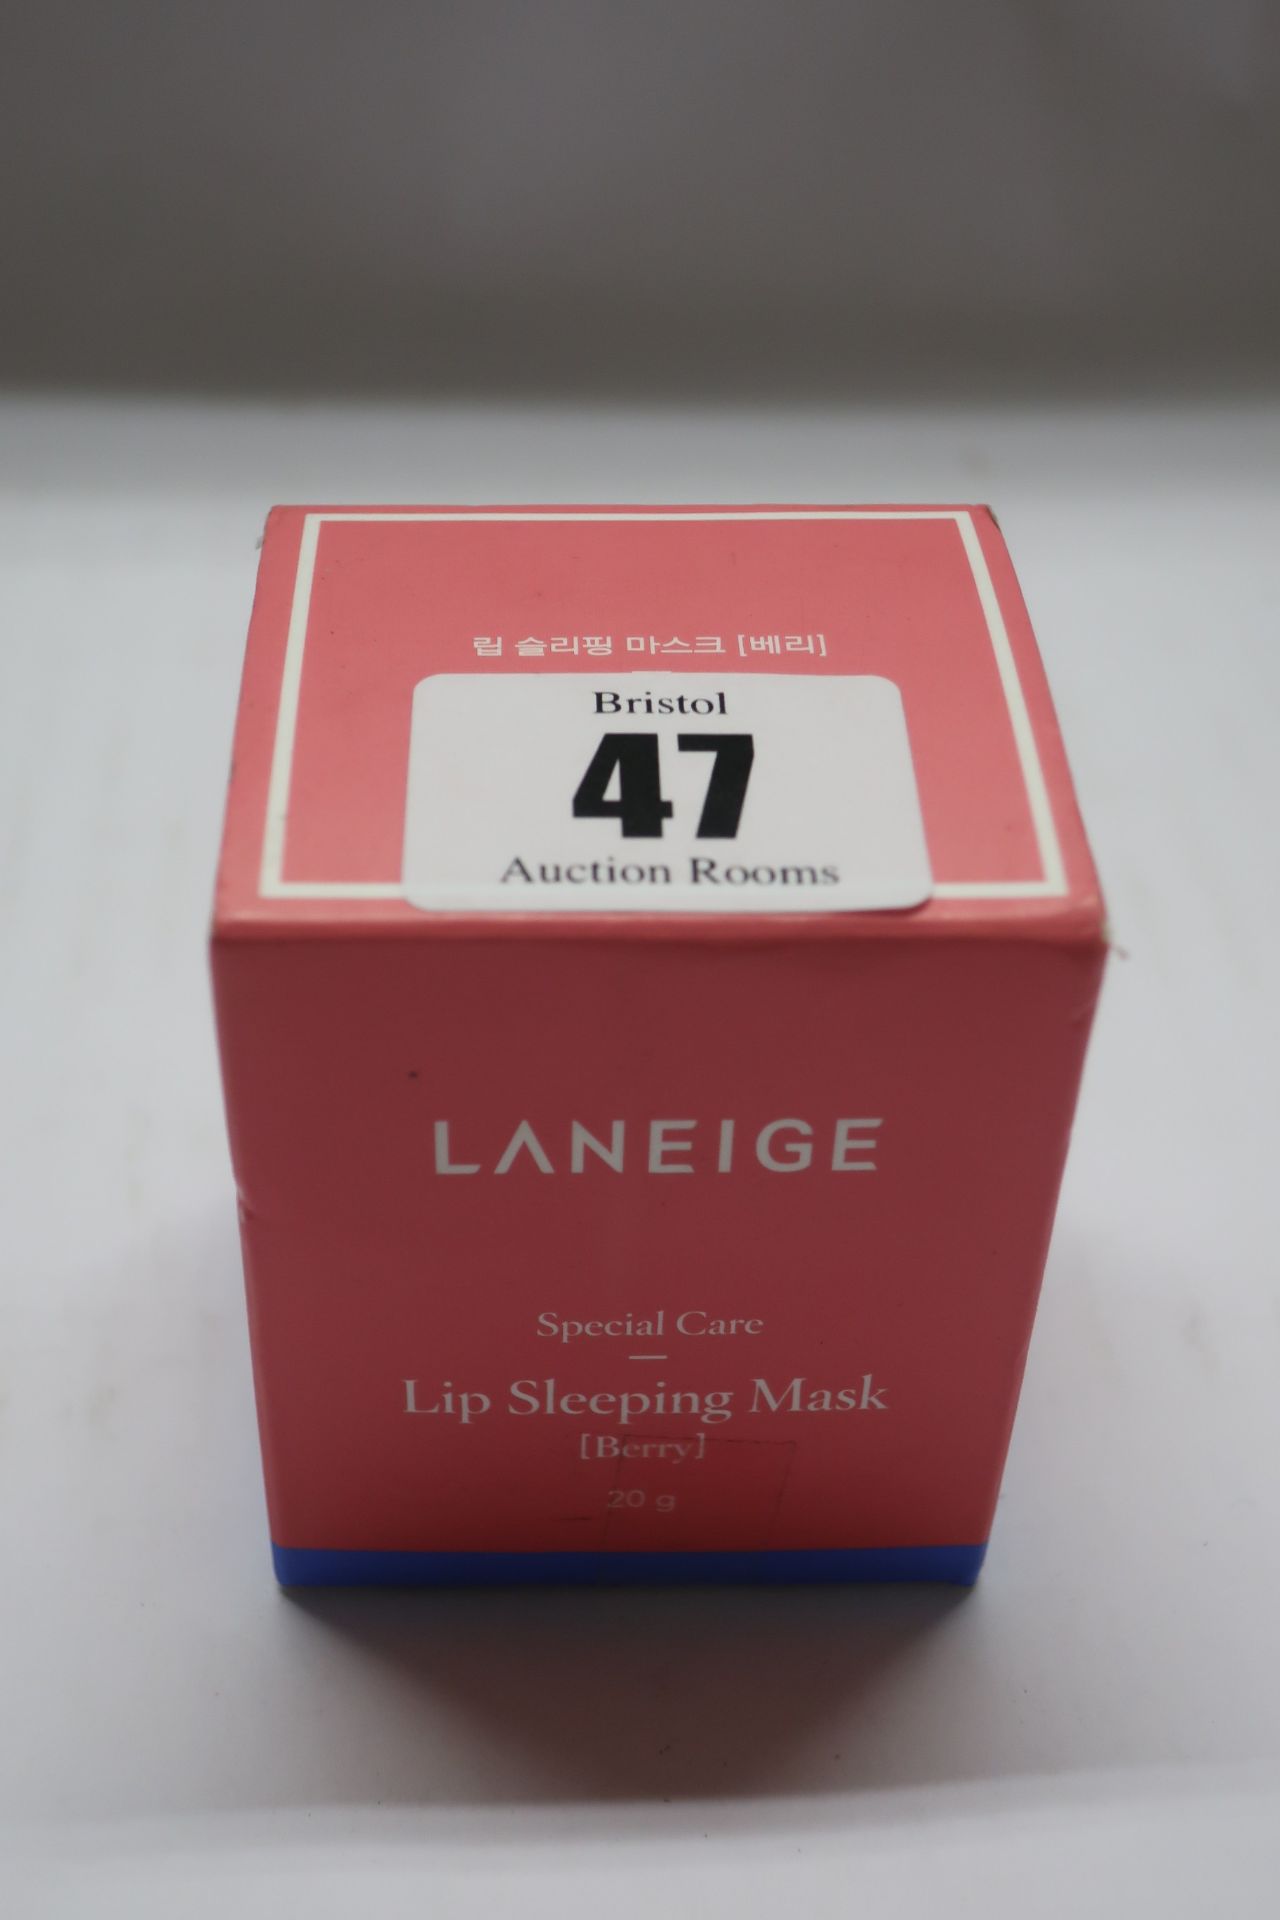 Eight Laneige special care lip sleeping masks (20g).